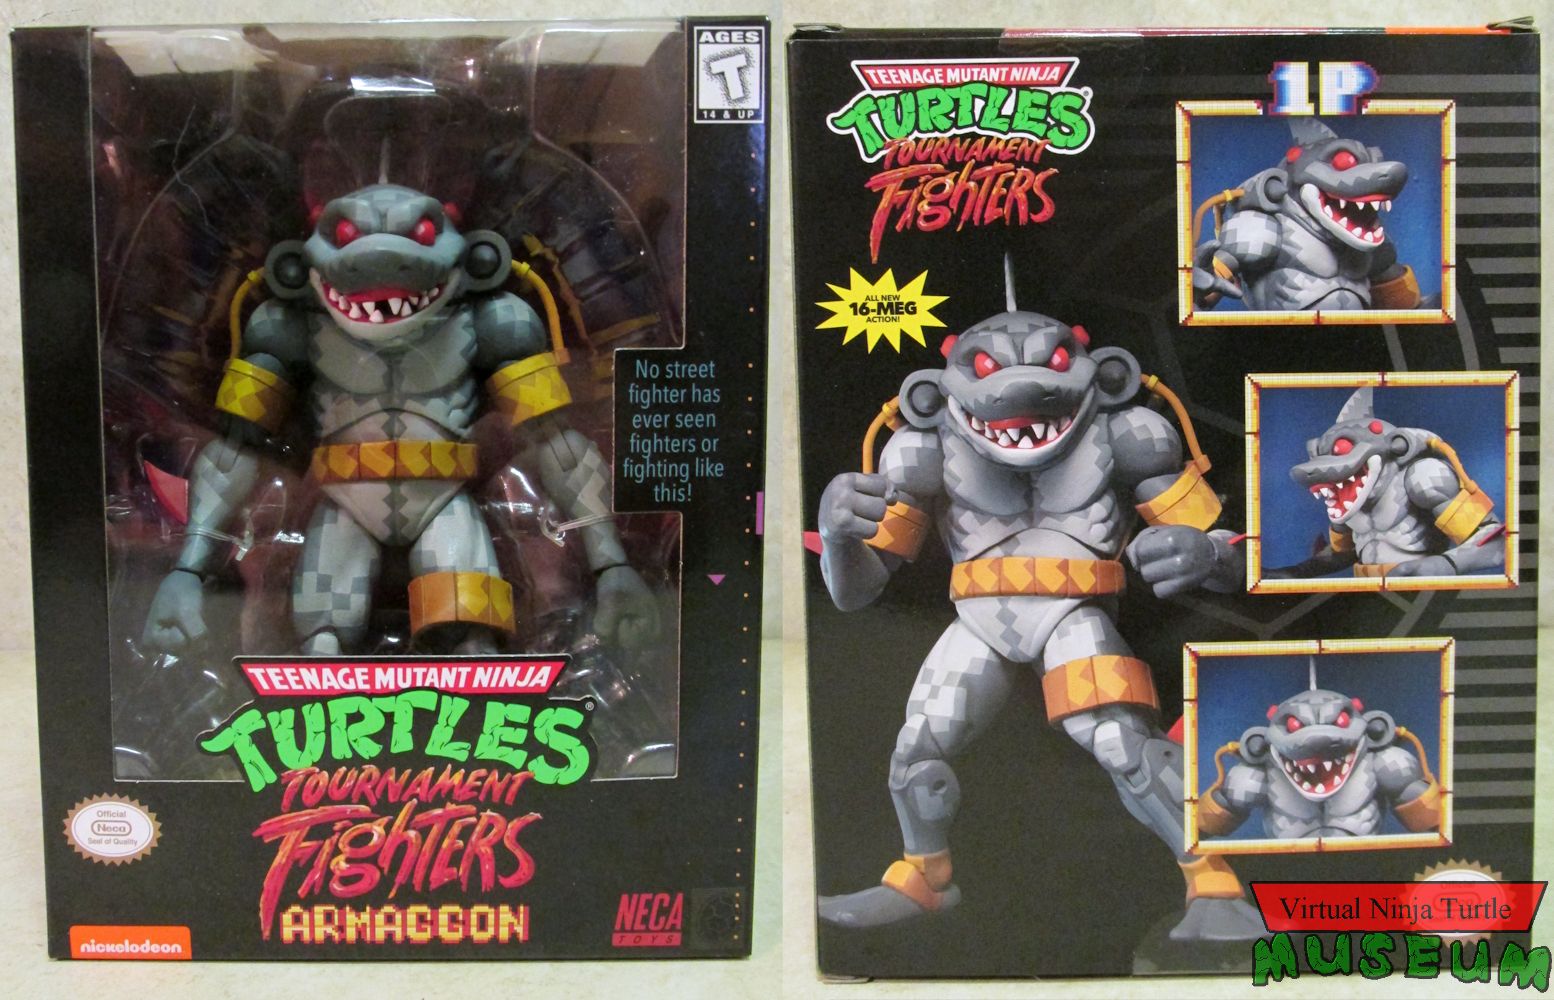 Armaggon MIB front and back